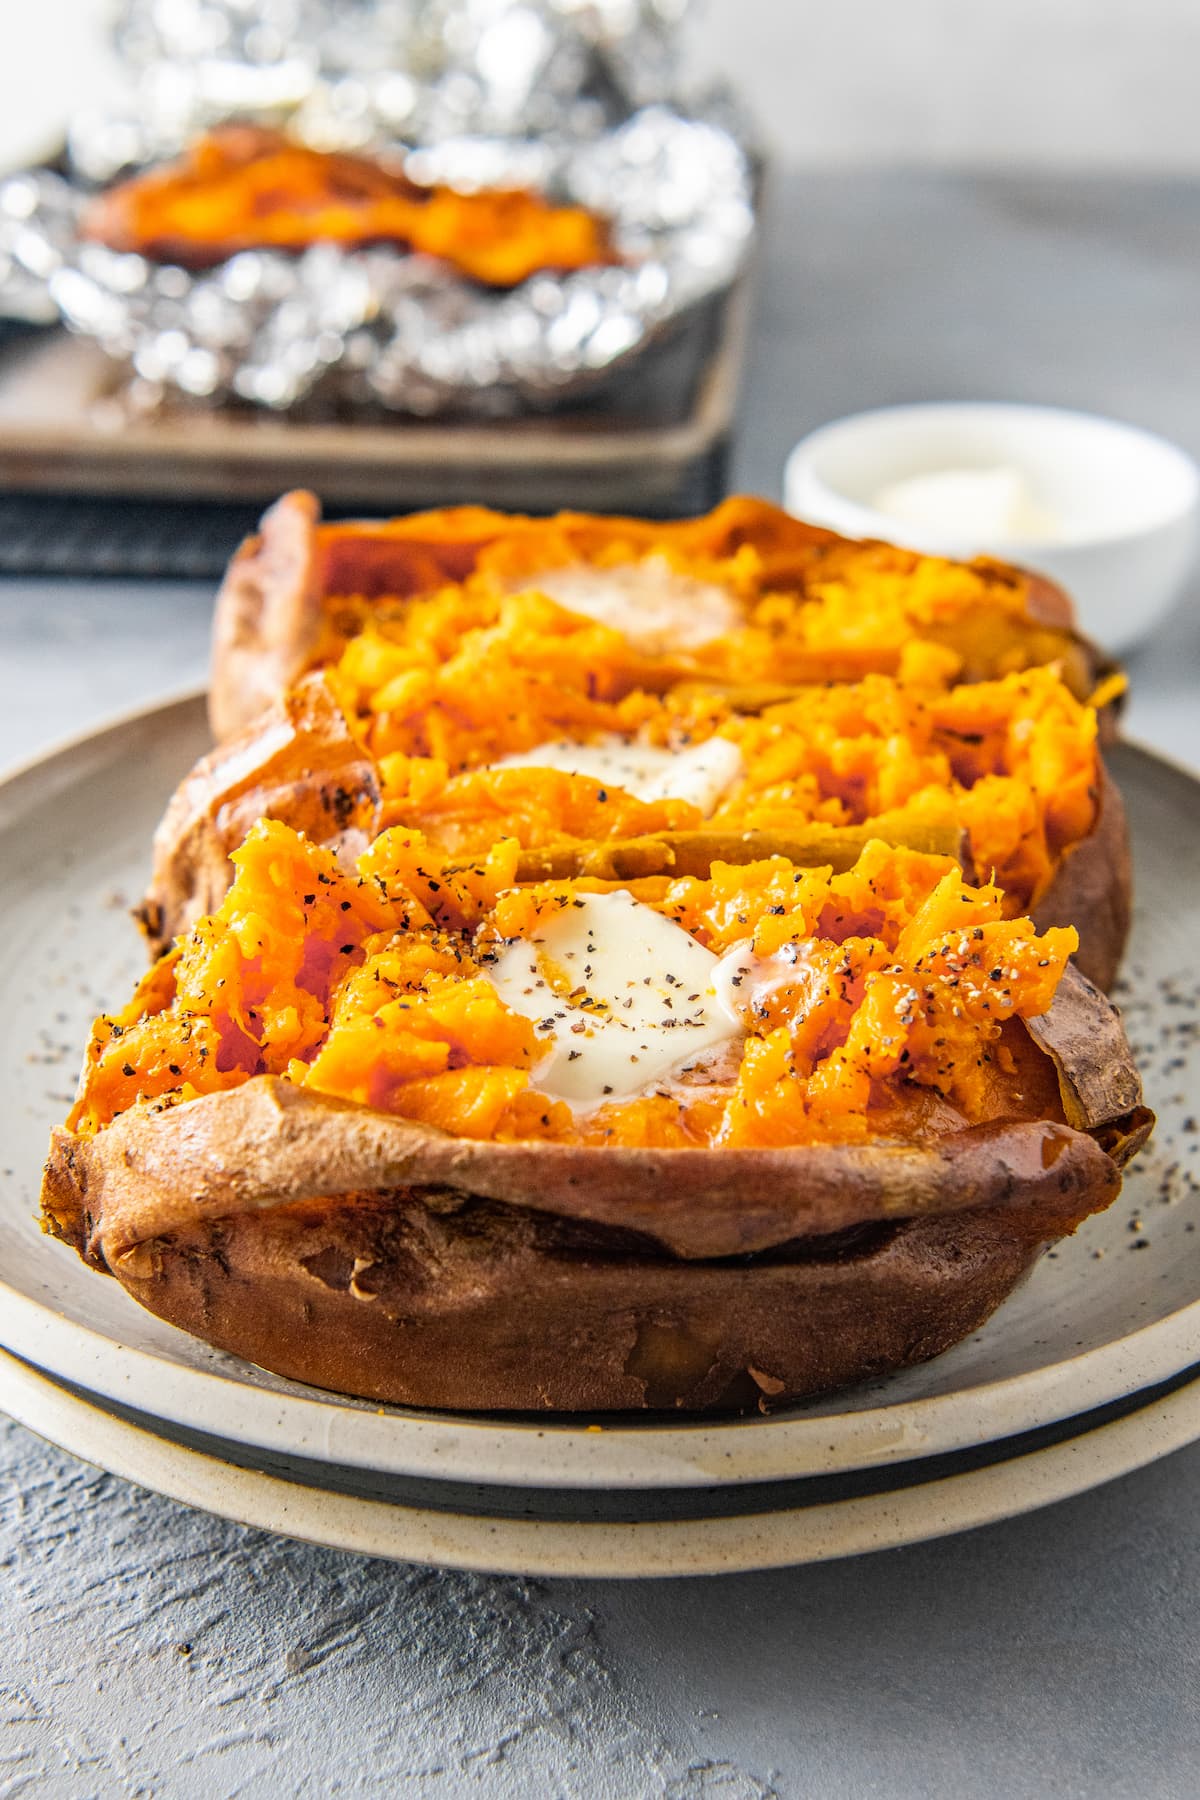 three baked sweet potatoes with butter, salt, and pepper on a plate